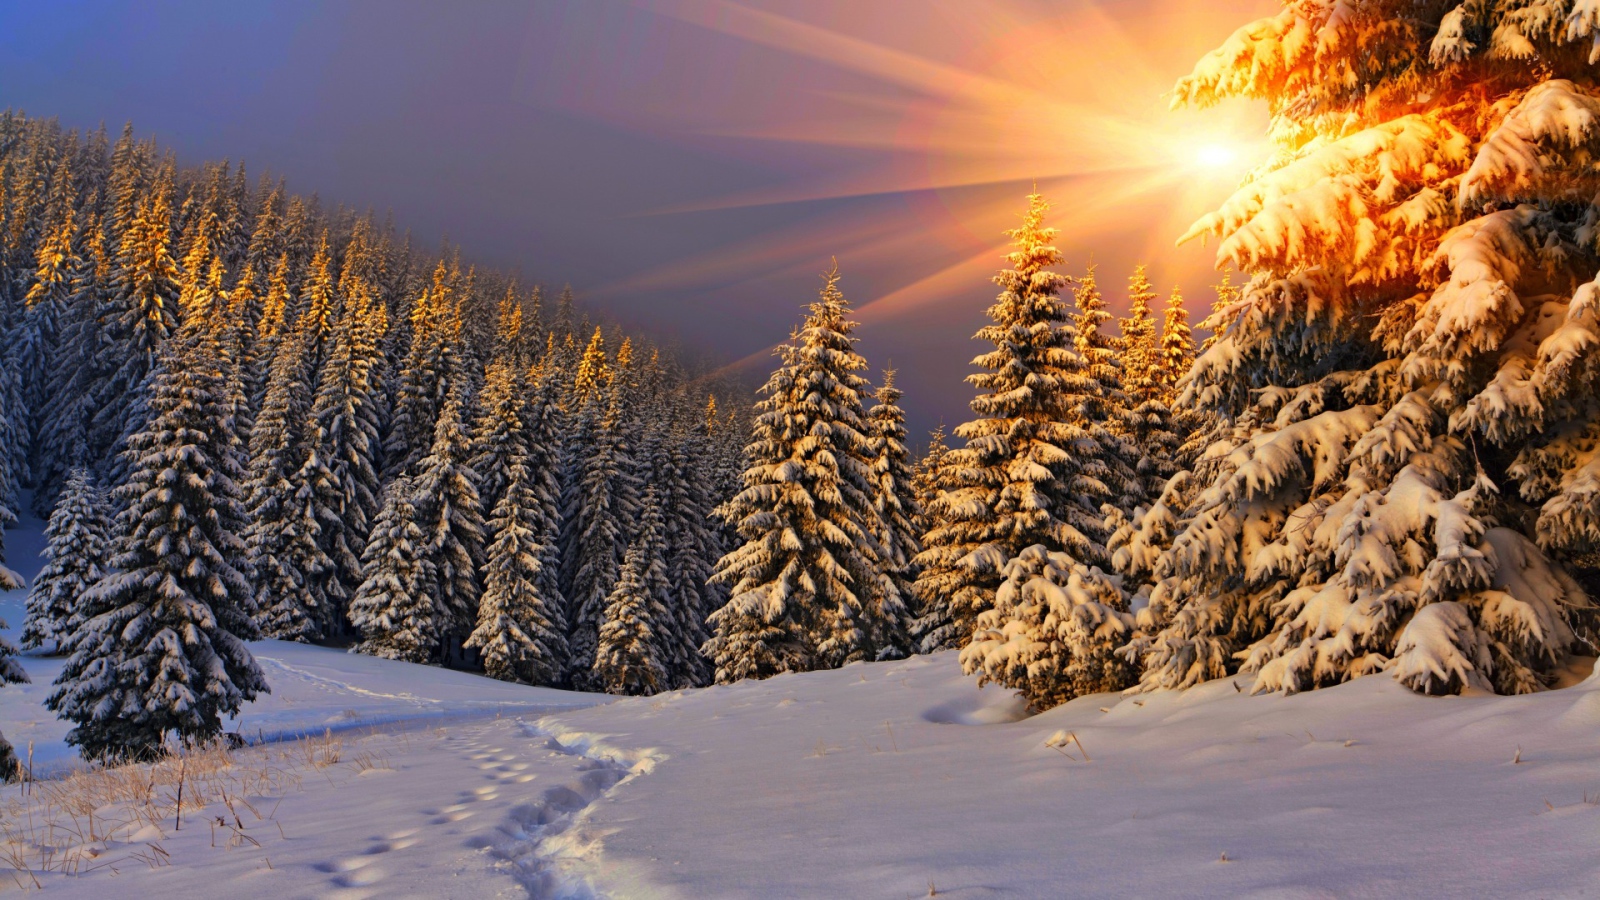 Snow-covered fir trees in the sun